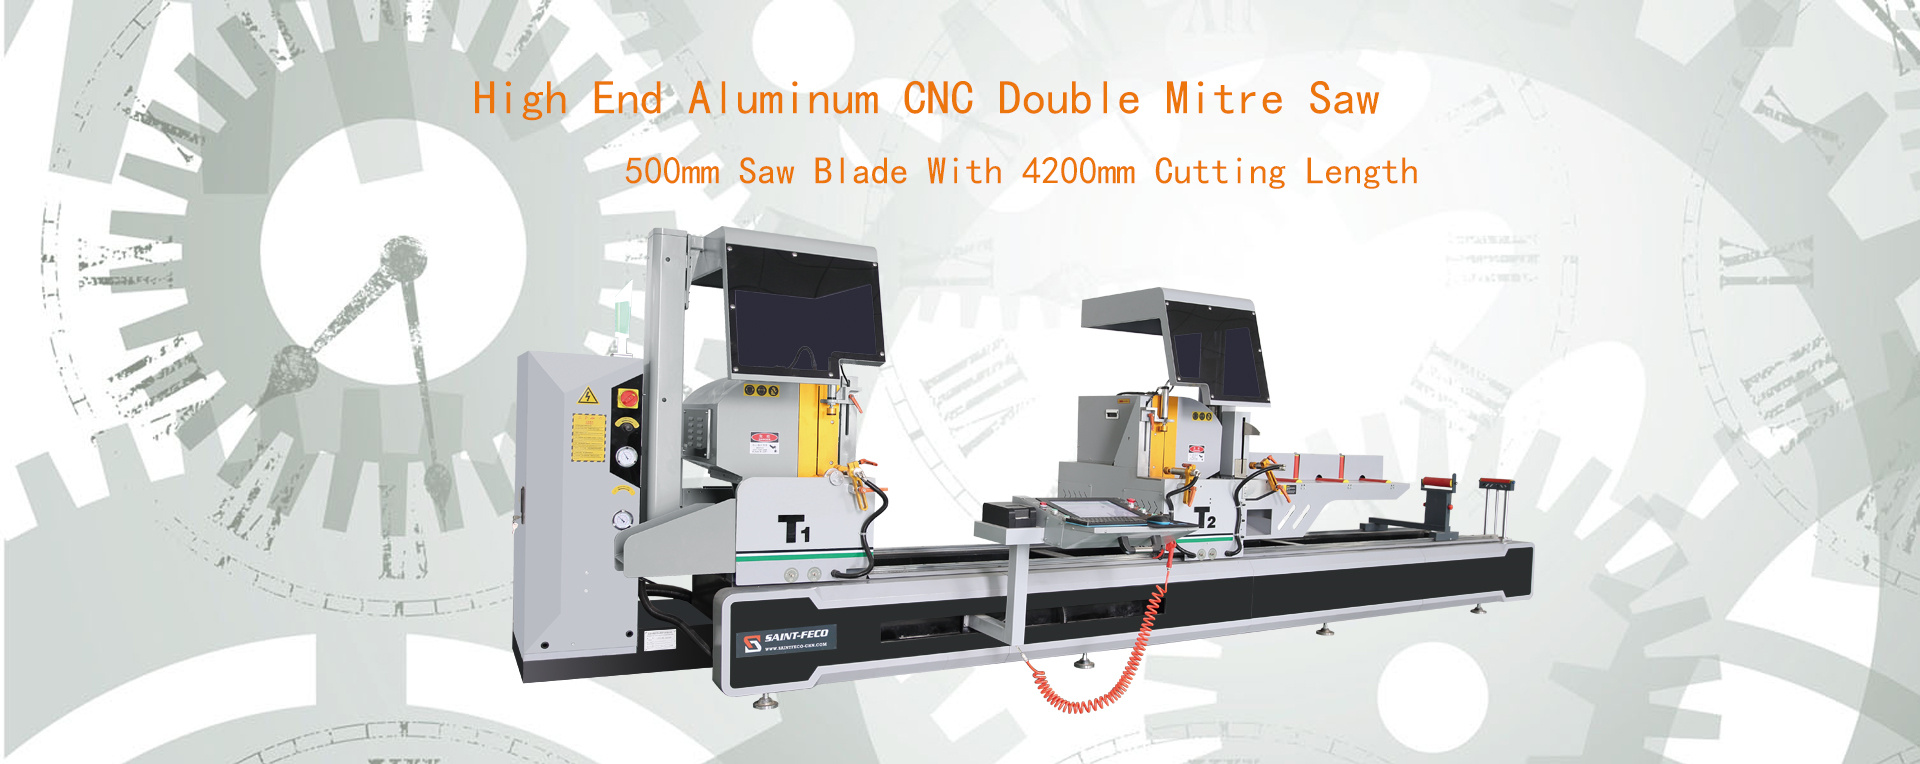 Aluminum CNC Double Mitre Saw 500mm Saw Blade With 4200mm Cutting Length